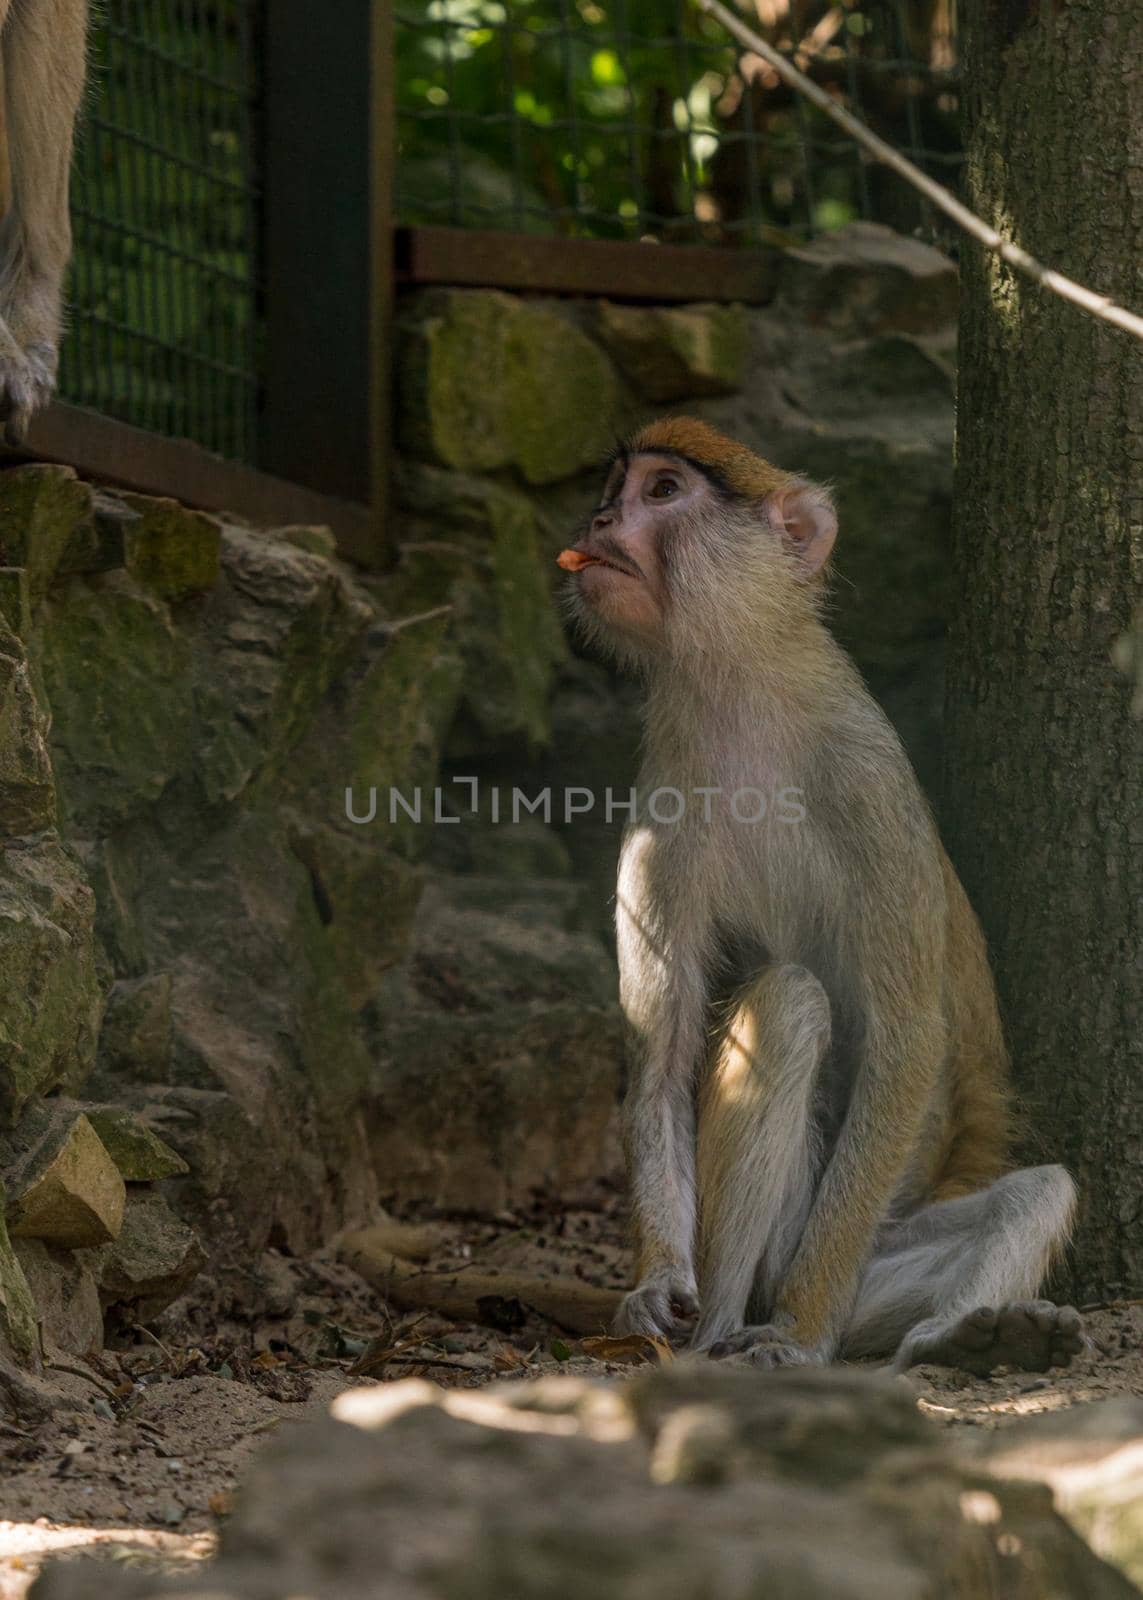 Brown monkey primate sitting in cage and eating by scudrinja